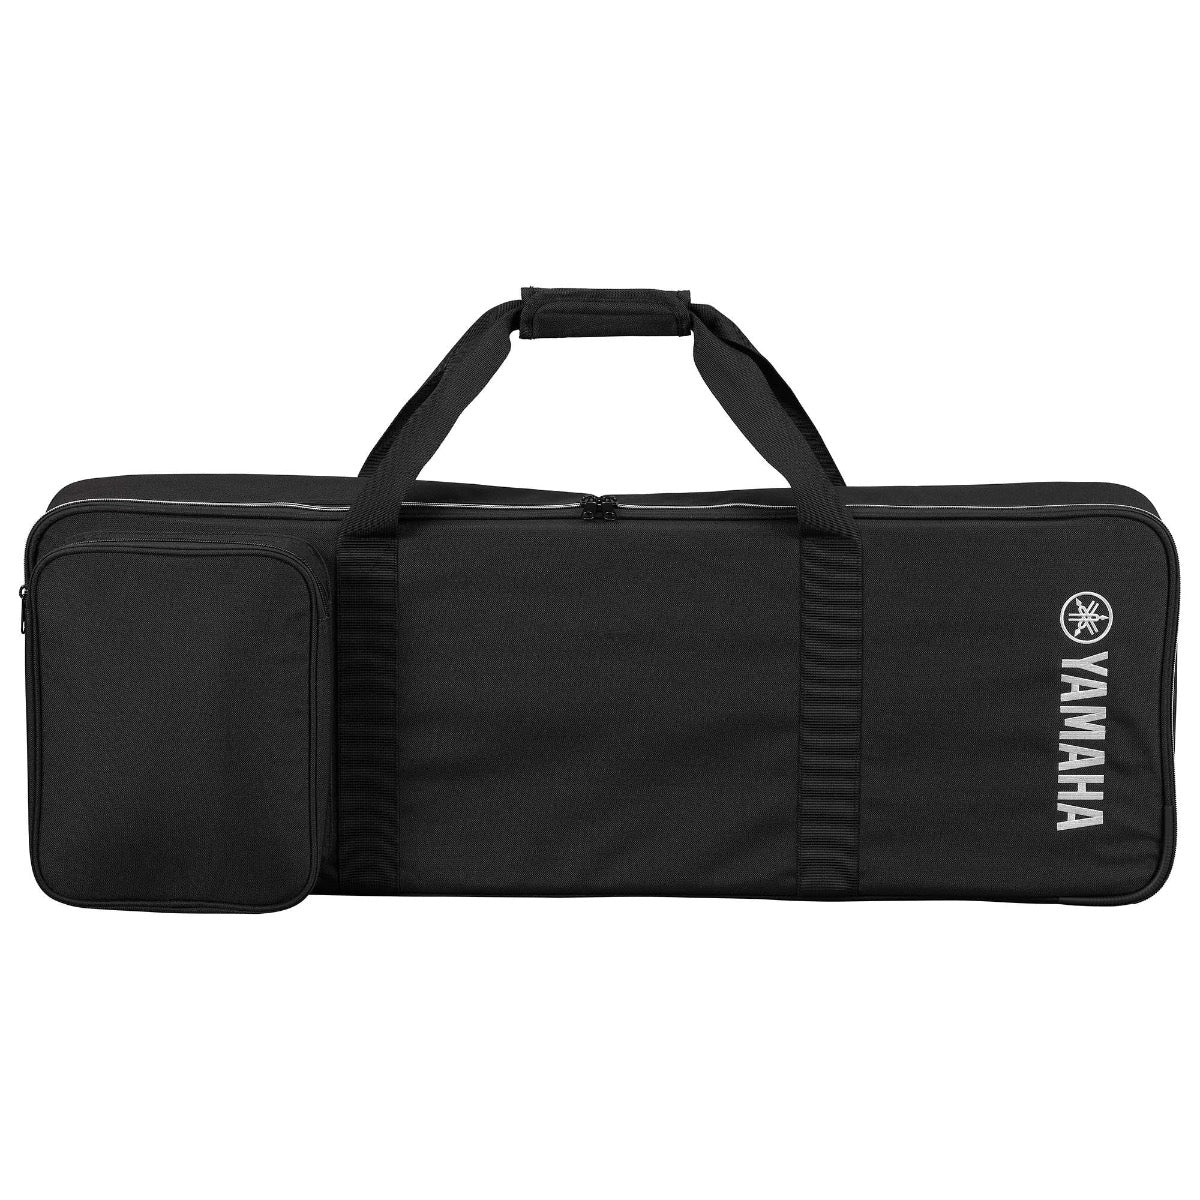 Yamaha SCDE61 Soft Case for CK61 - Backpack Style, View 1